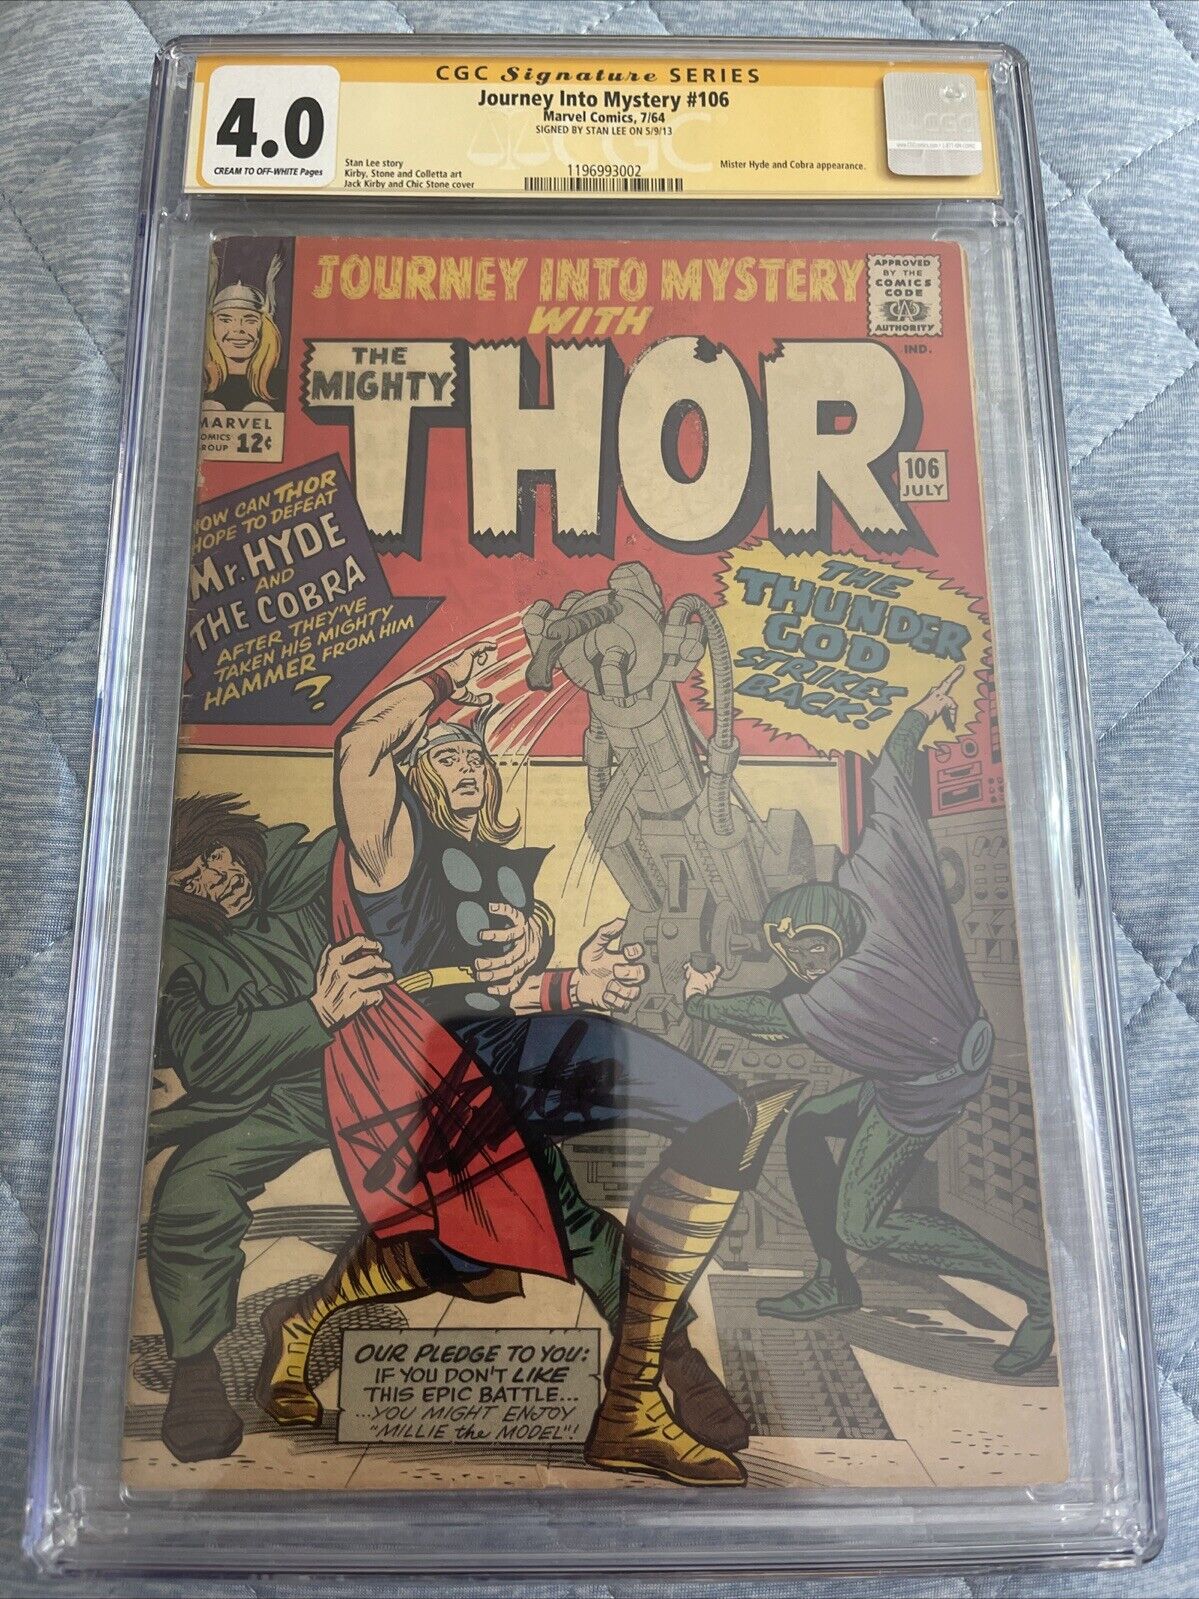 Journey Into Mystery With THOR # 106 CGC 4.0 signed by STAN LEE